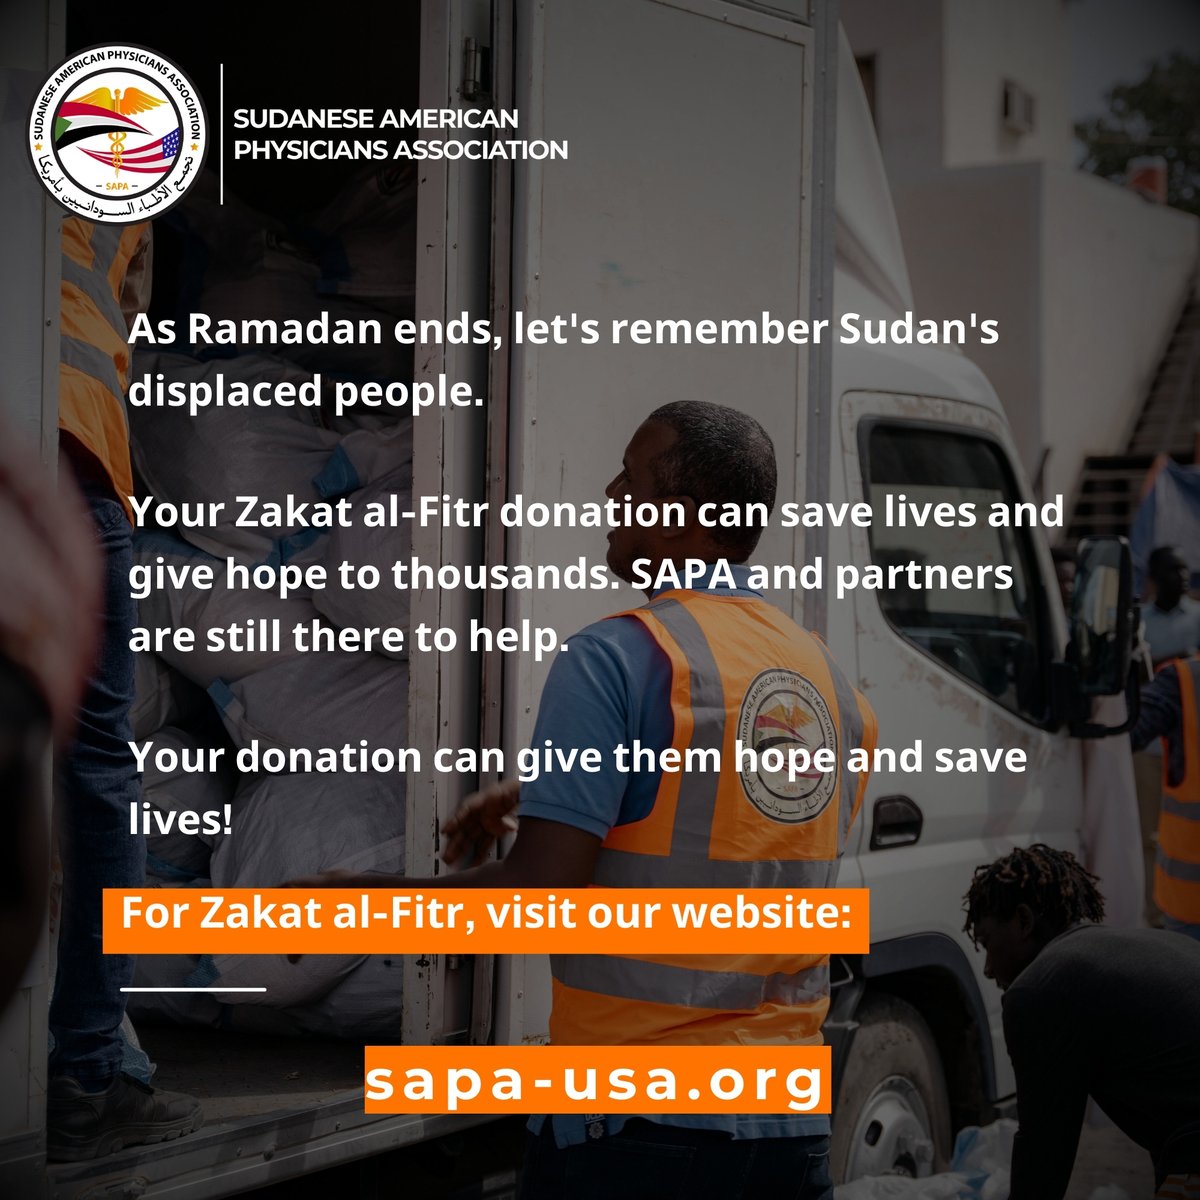 As Ramadan ends, let's remember Sudan's displaced people. Your Zakat al-Fitr donation can save lives and give hope to thousands. SAPA and partners are still there to help. #SAPAHopeForSudan

To donate your Zakat al-Fitr, visit our website: sapa-usa.org